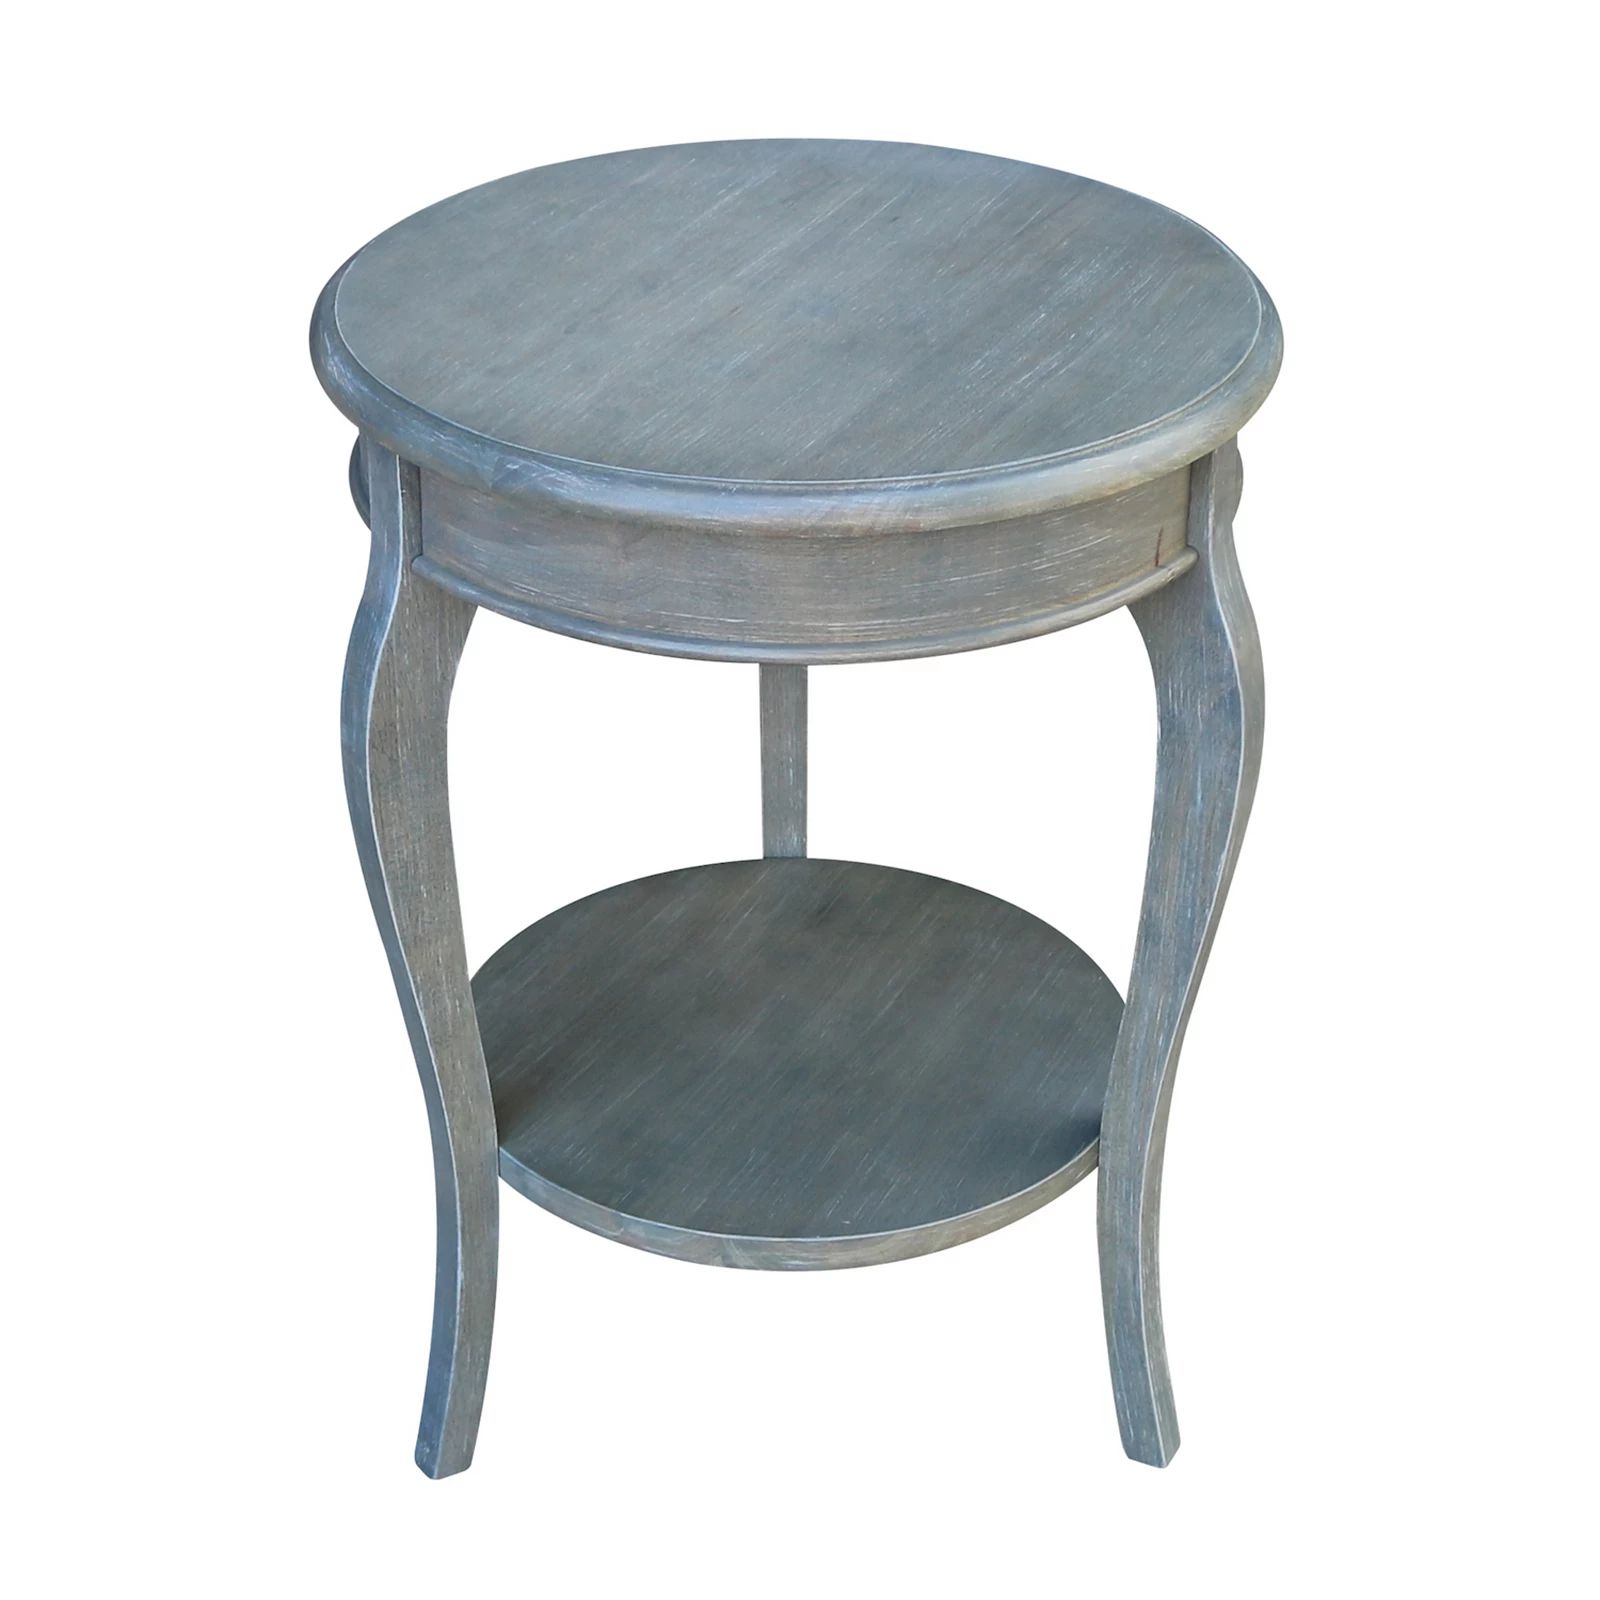 International Concepts Cambria Round End Table, Grey | Kohl's